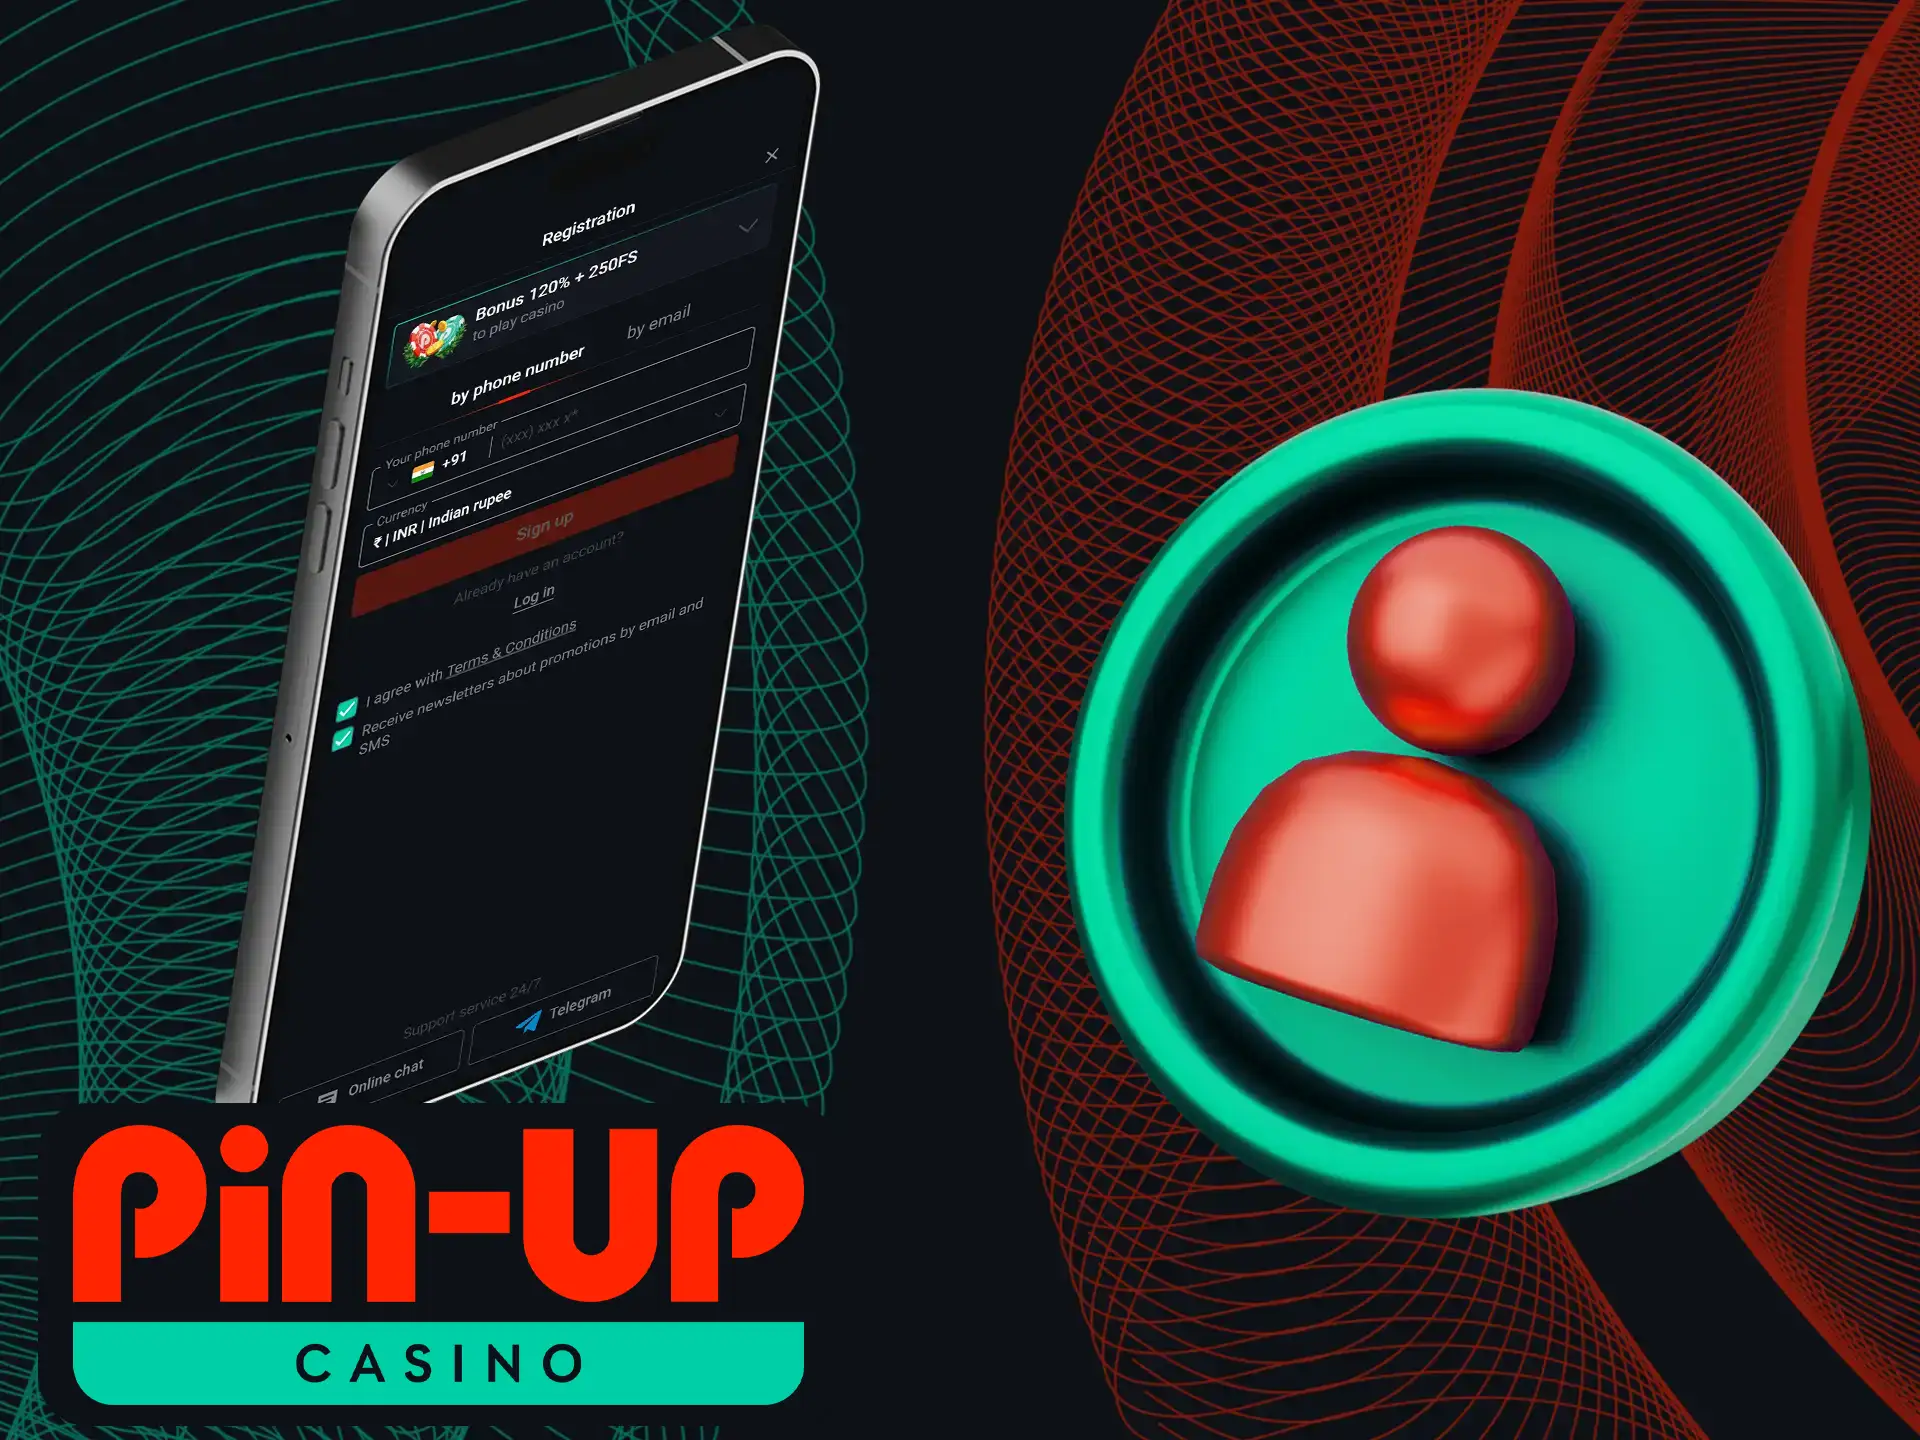 You must register before you can start playing games at Pin-Up Casino for real money.